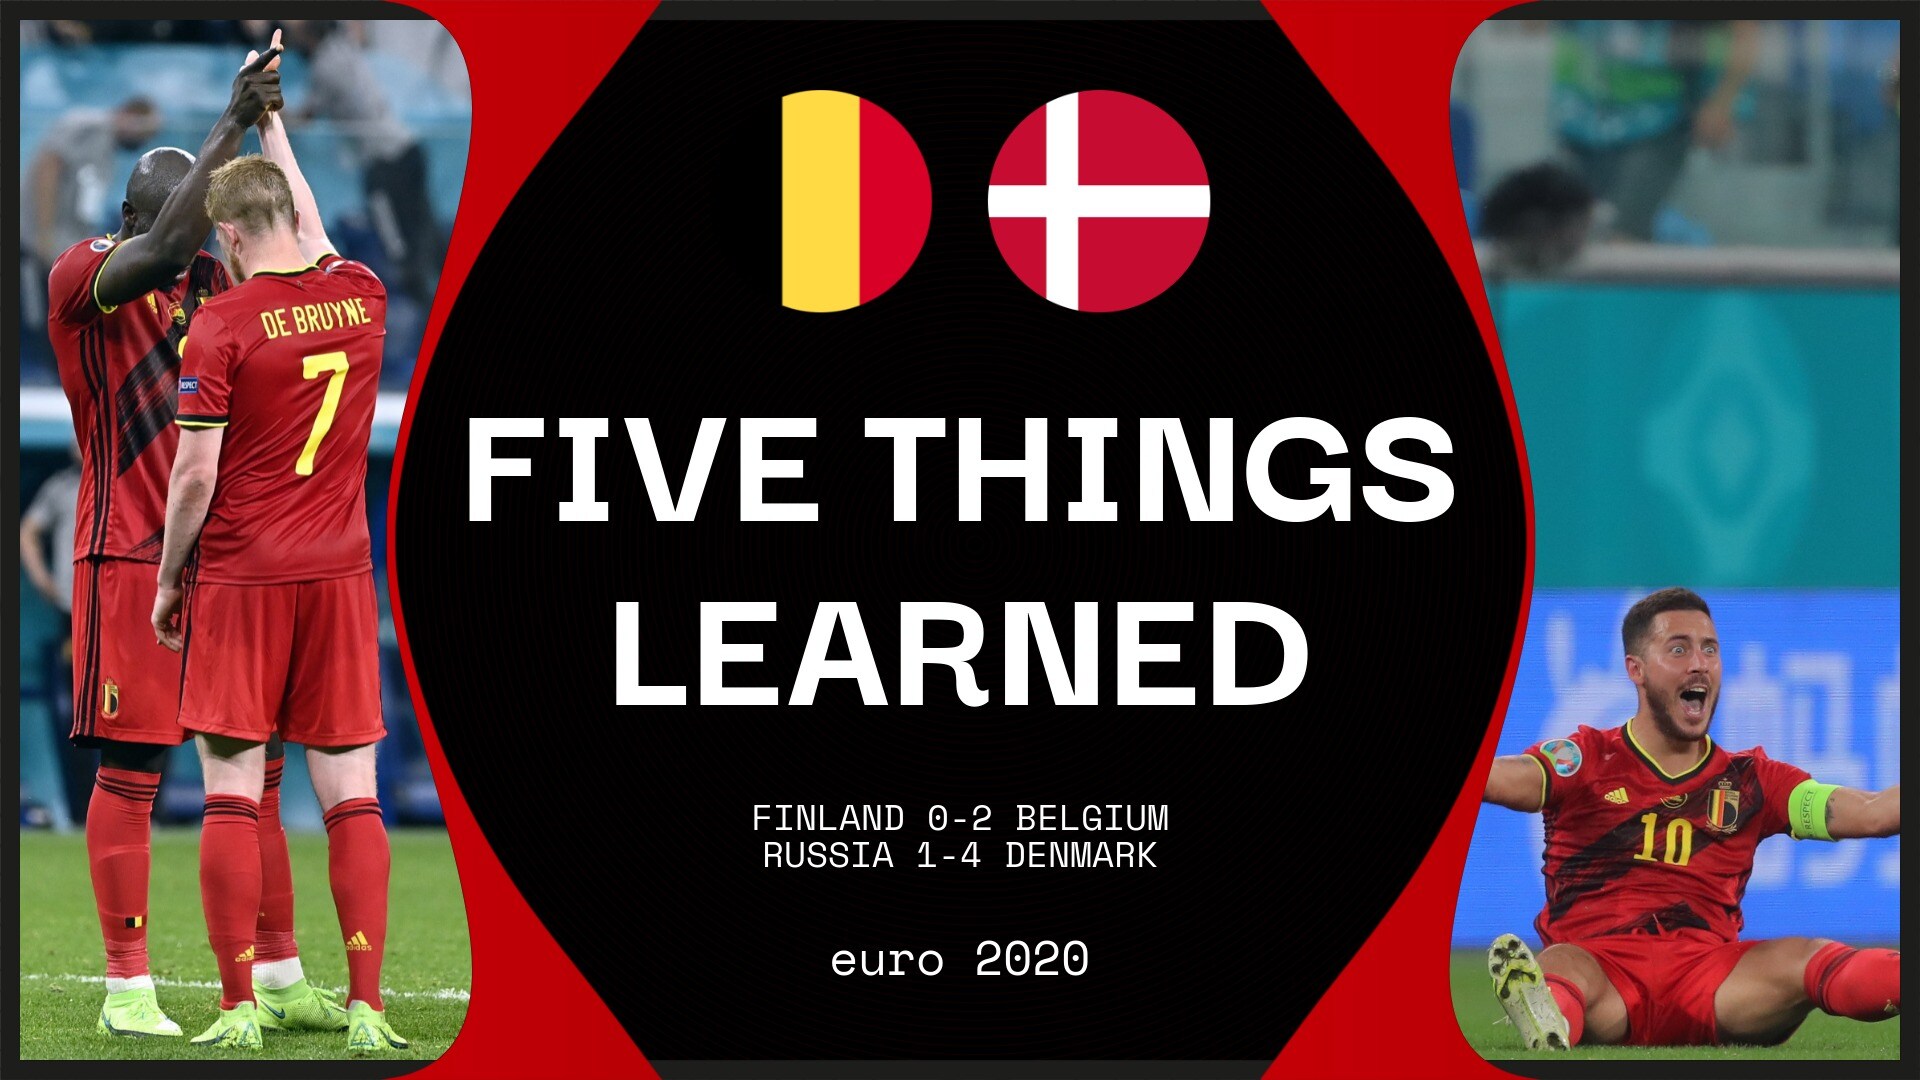 Finland 0-2 Belgium and Russia 1-4 Denmark: Five things ...